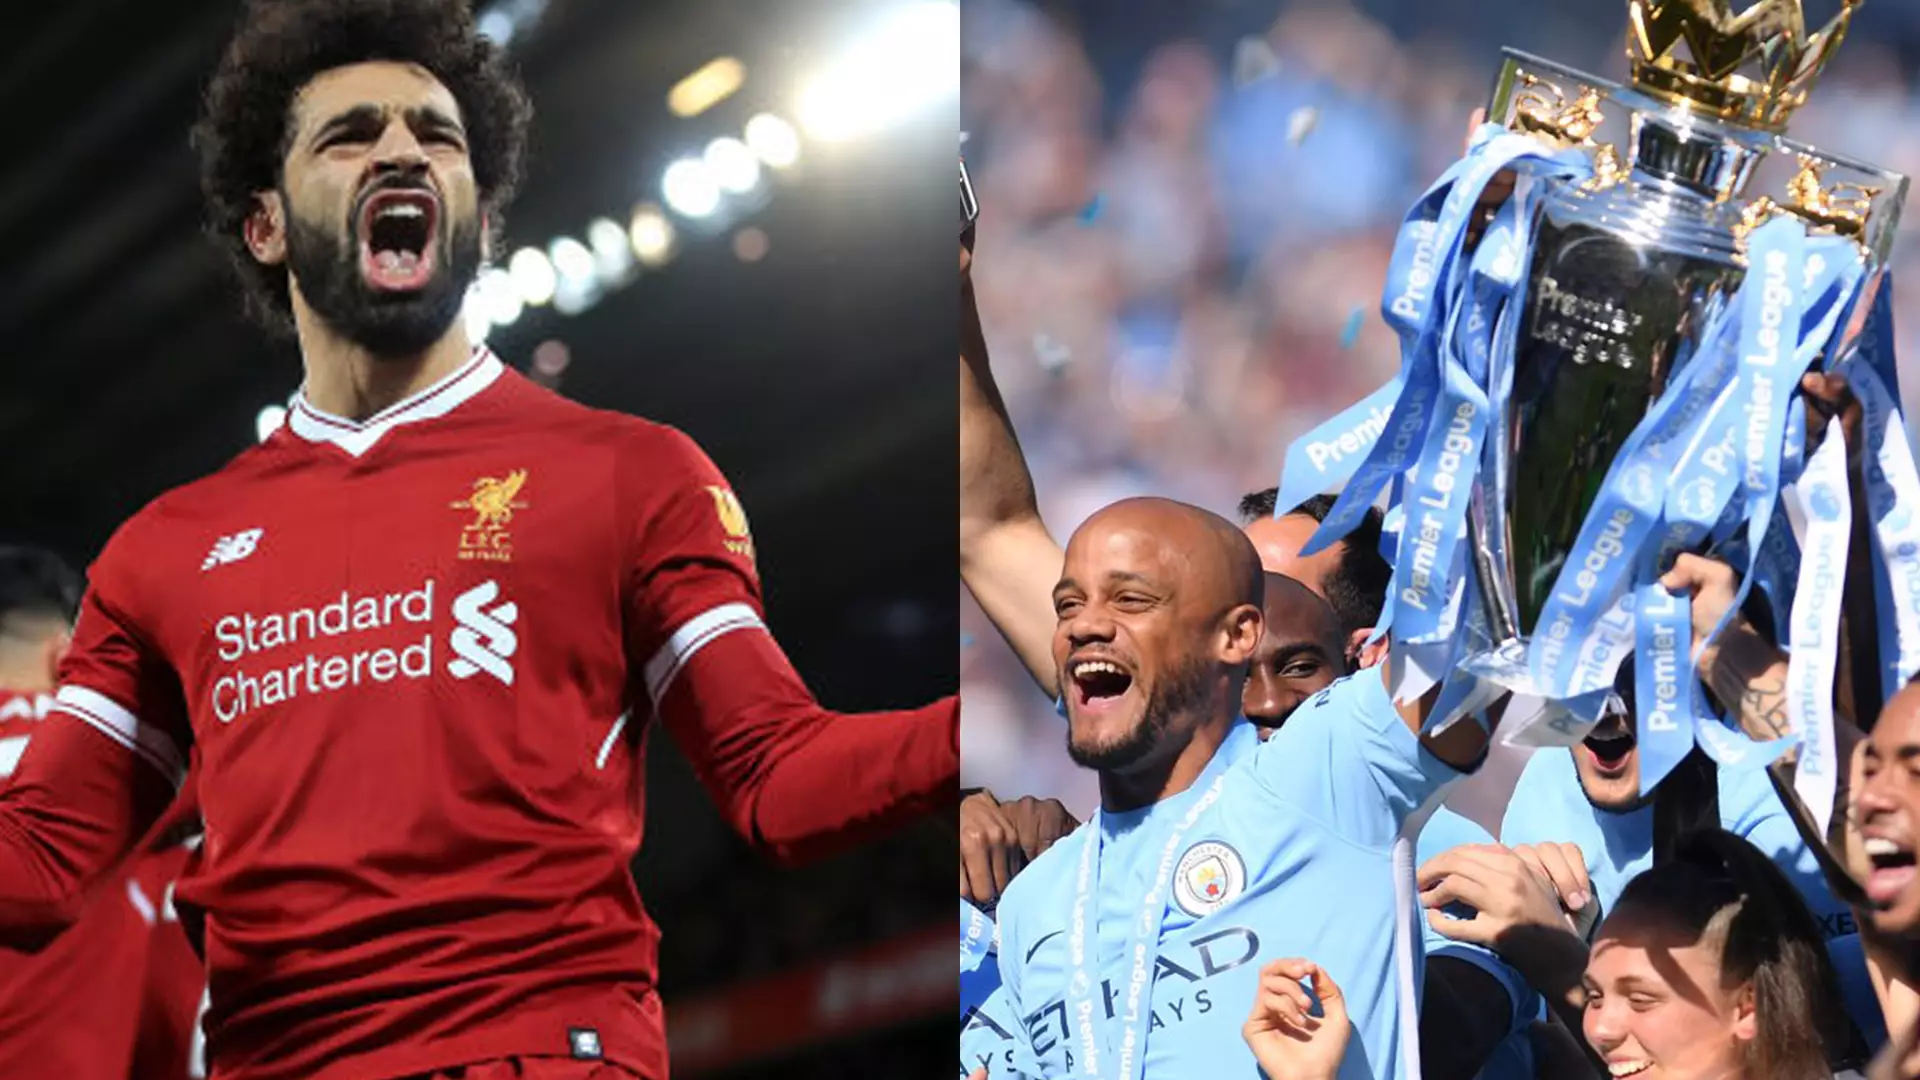 ODDSbible Previews The Opening Day Of The Premier League Season